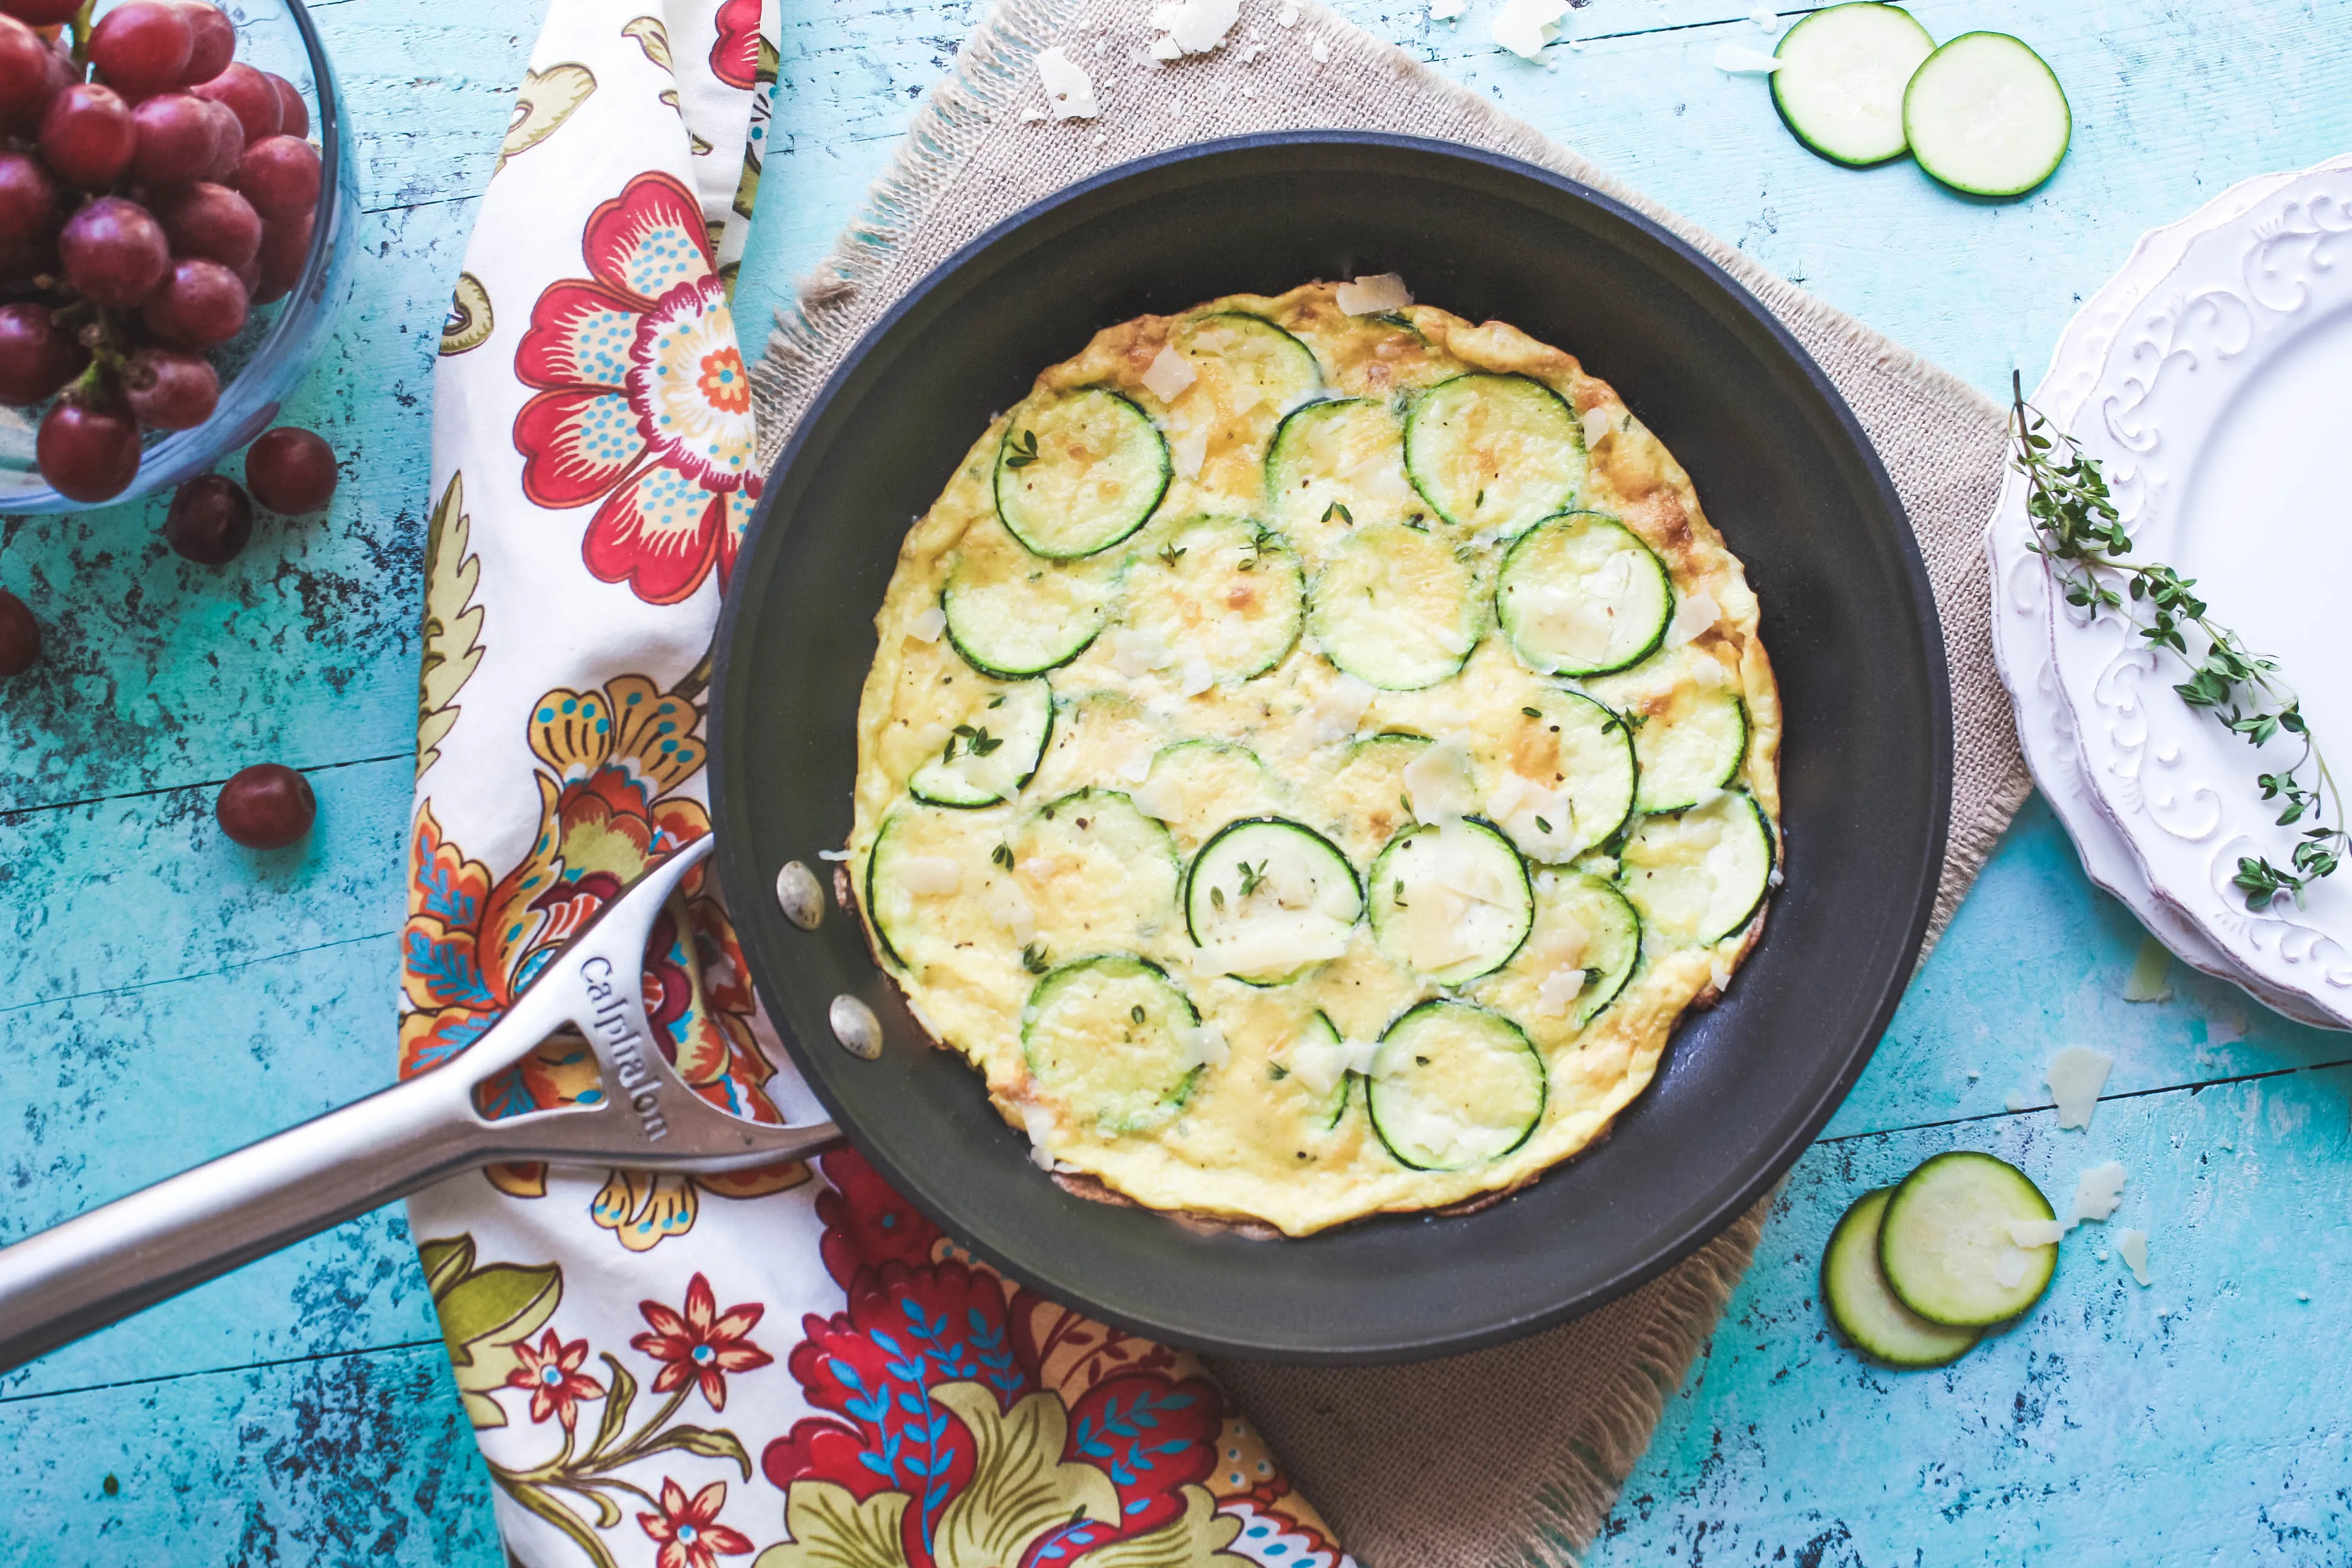 Zucchini-thyme frittata for two is a simple dish that's perfect for breakfast. Zucchini-thyme frittata for two makes a delightful dish for any meal.